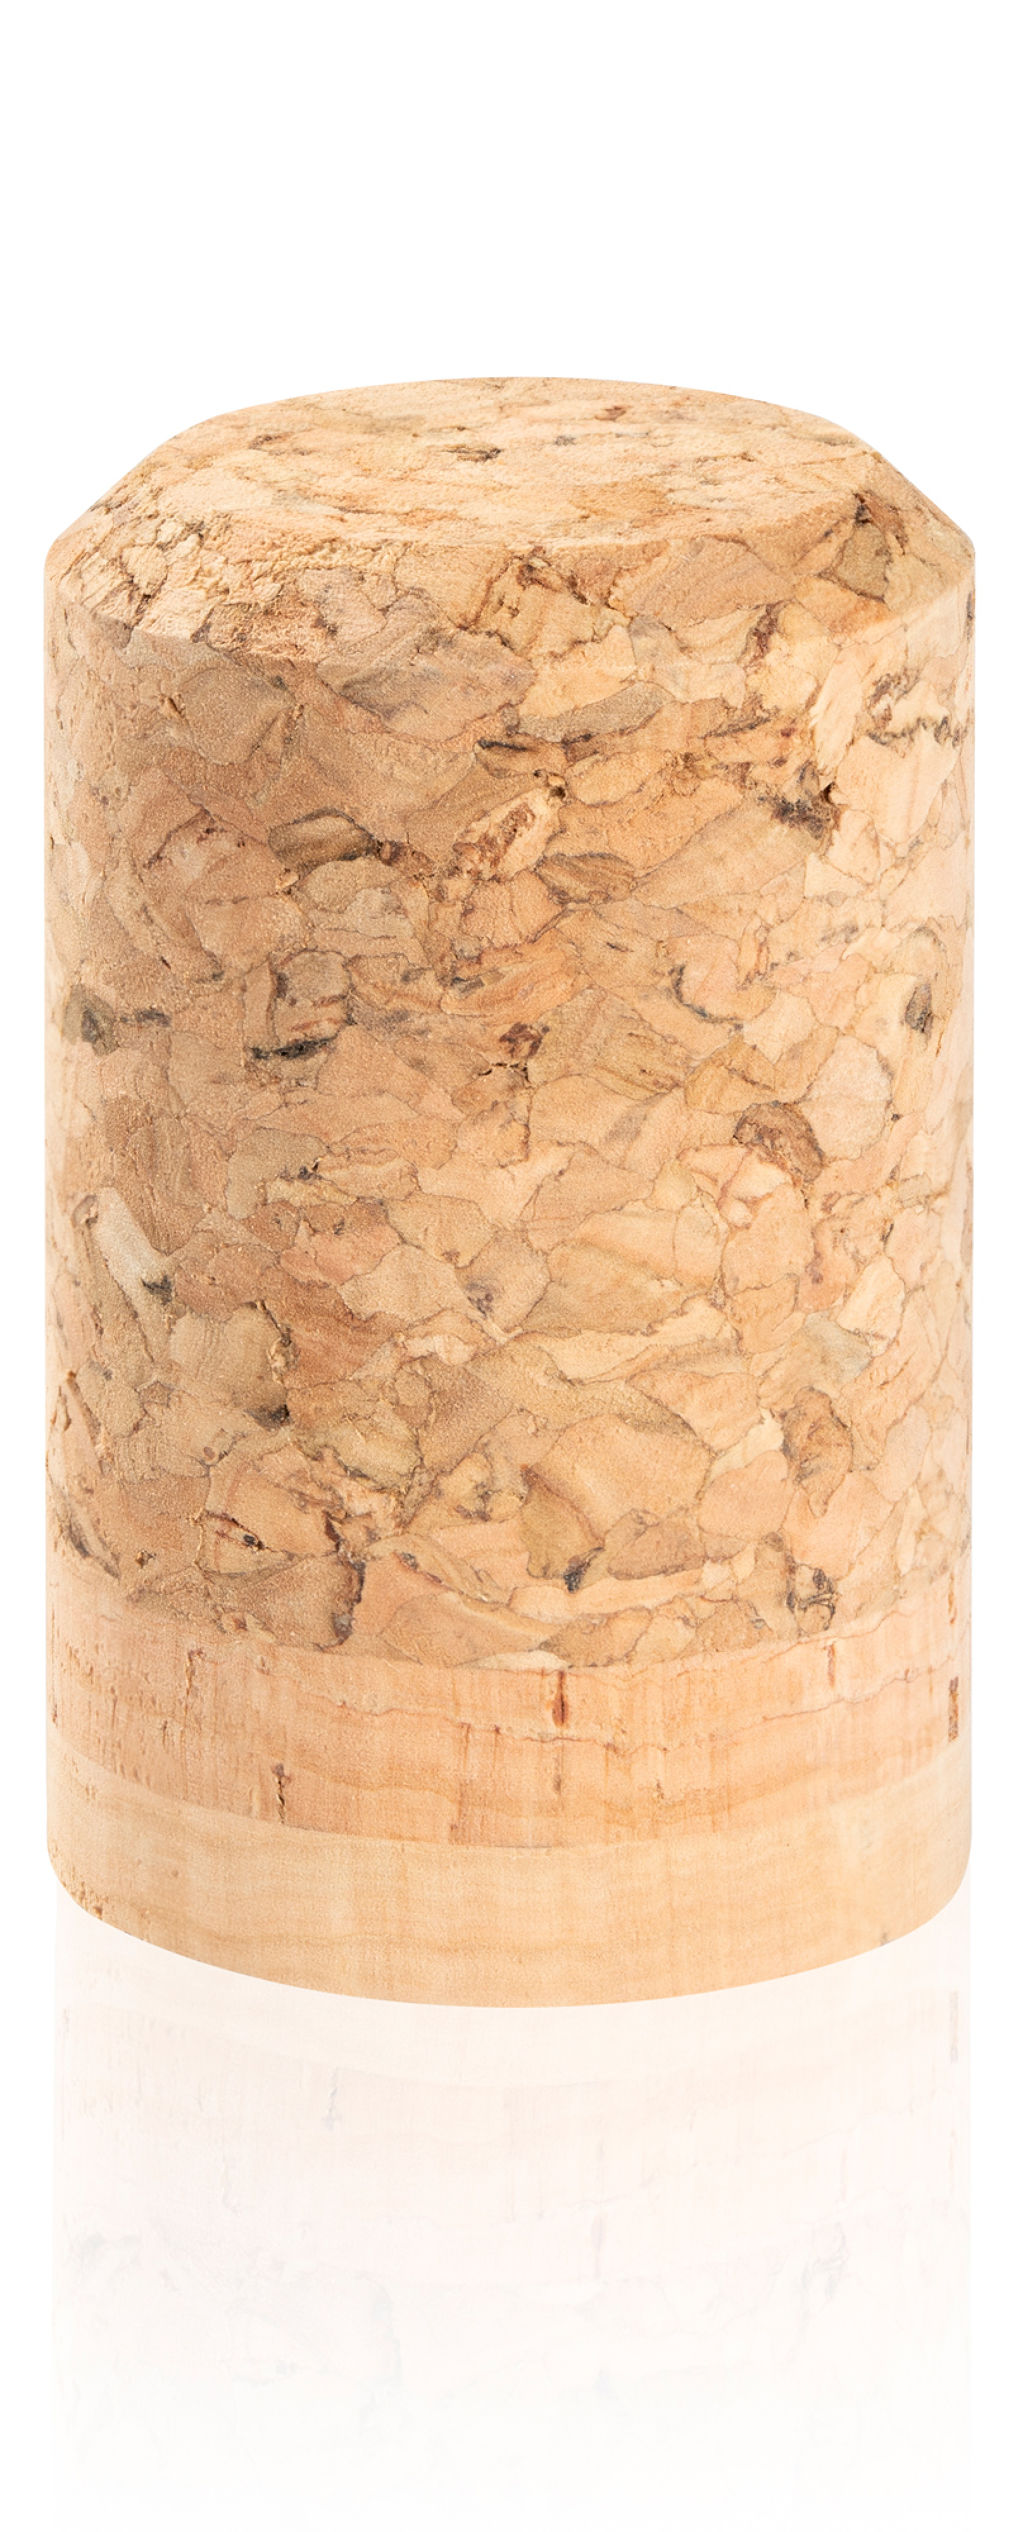 Agglomerated cork stoppers with natural cork discs - 11e79-tap5.jpg